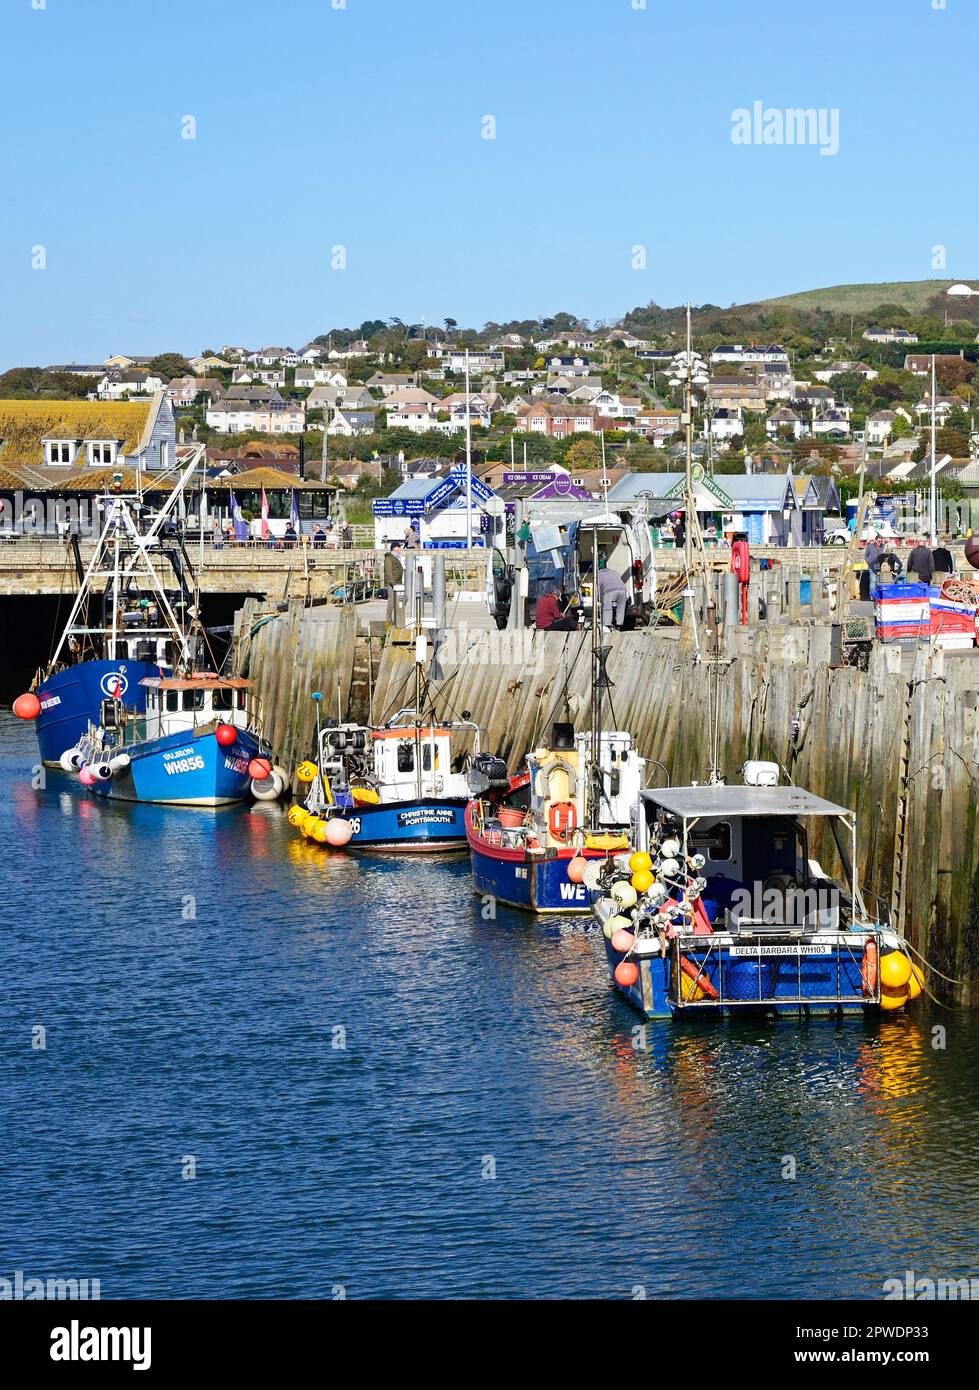 Fishing boats moored in the harbour with town buildings to the rear, West Bay, Dorset, UK, Europe. Stock Photo